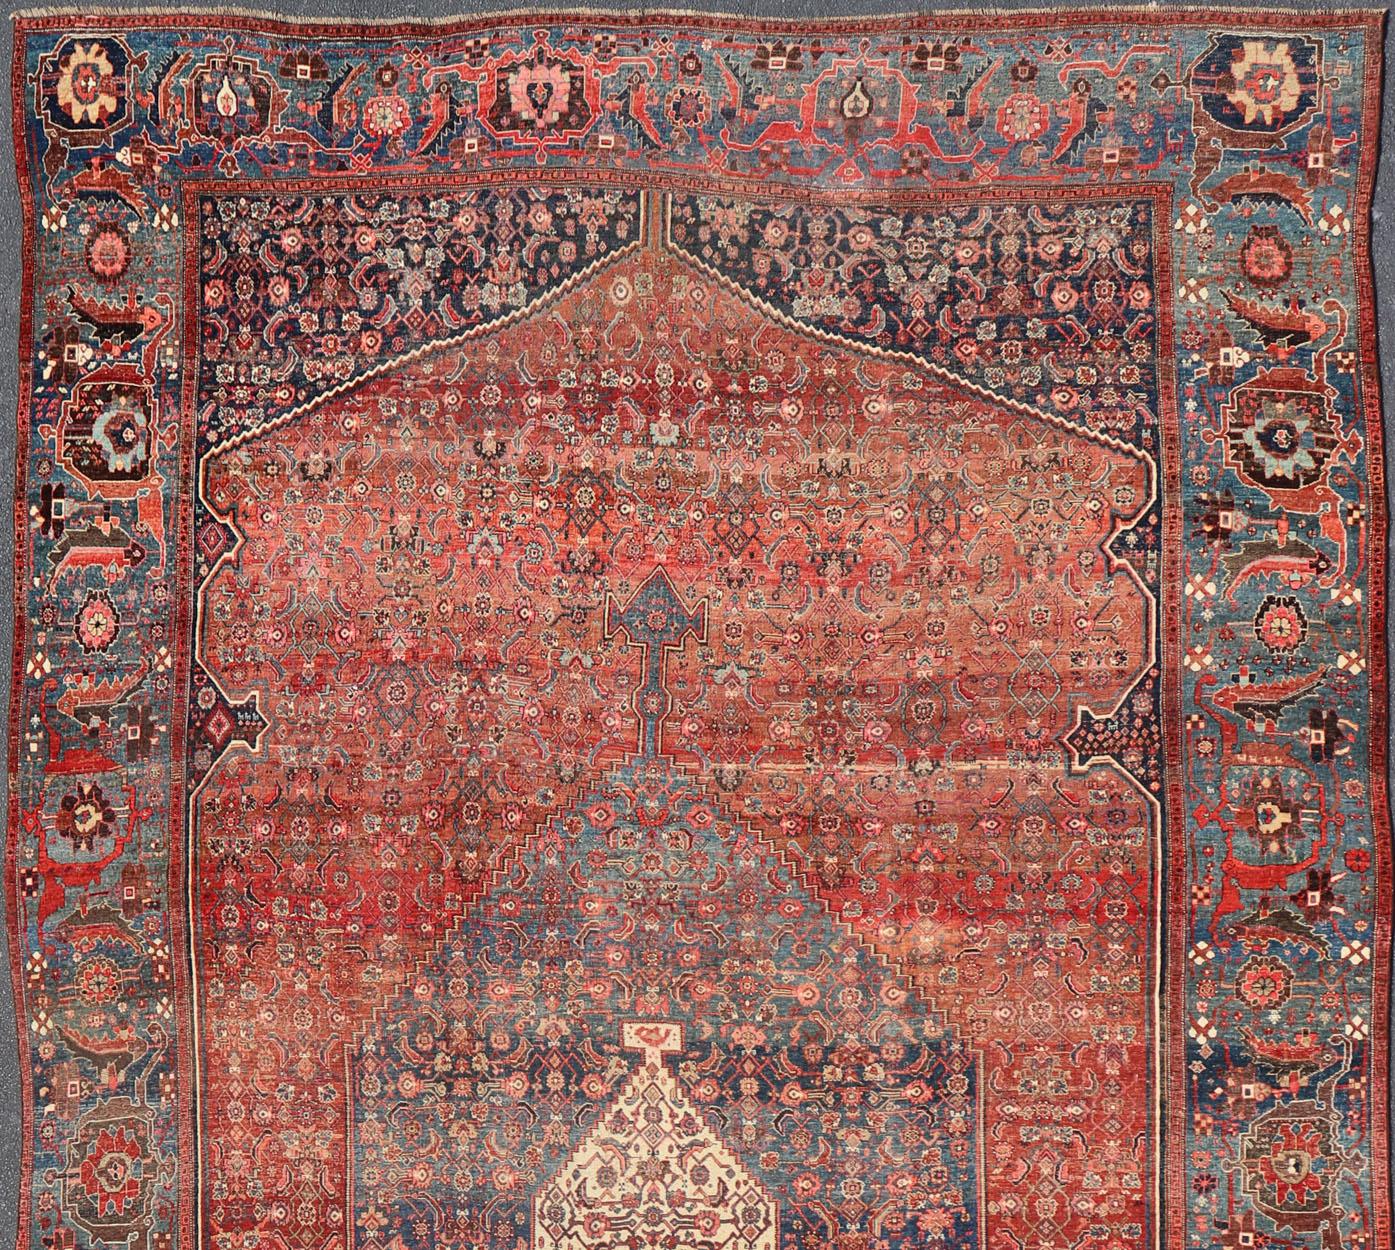 Classic Bidjar in tera-cotta and variety of beautiful red tones, framed by variegated shades of blue colors in the border with large Scale Geometrics. Bidjar antique rug from Persia in medallion design, rug V21-0106, country of origin / type: Iran /